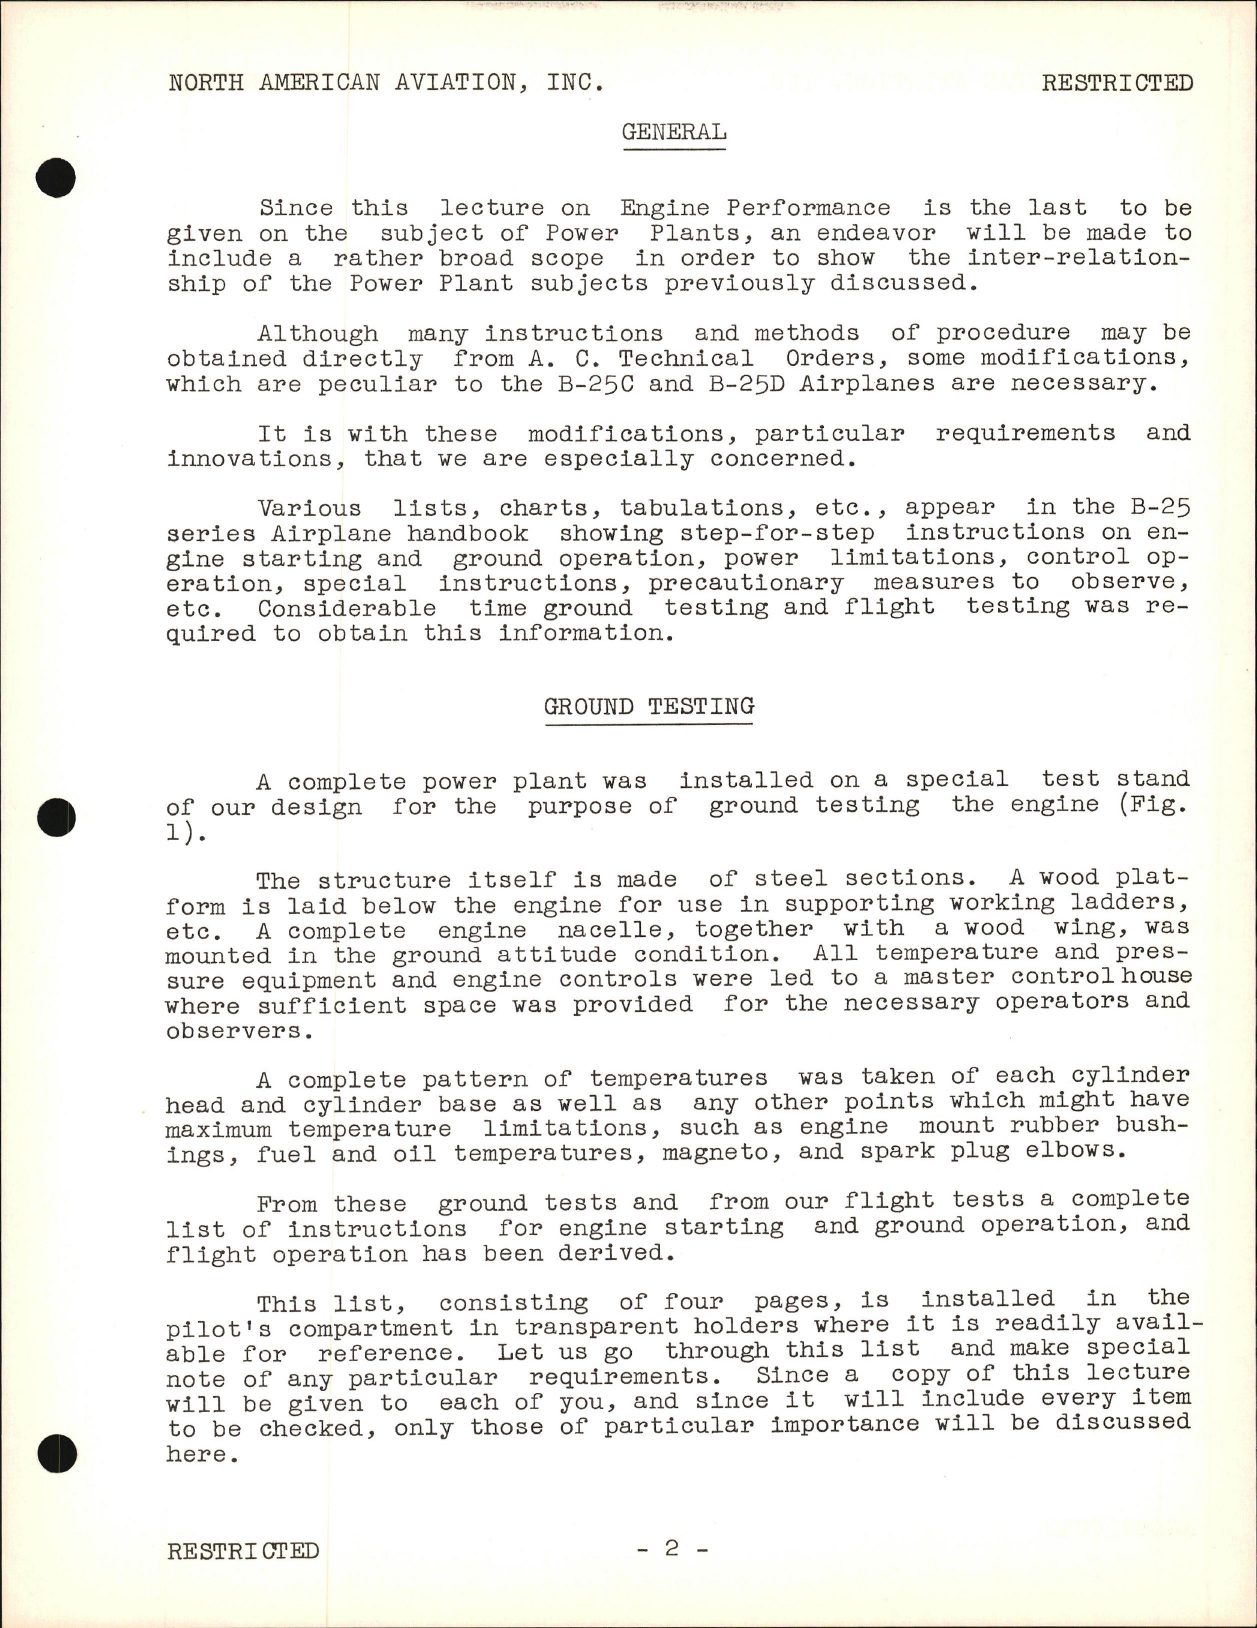 Sample page 7 from AirCorps Library document: Service School Lectures - Engine Performance